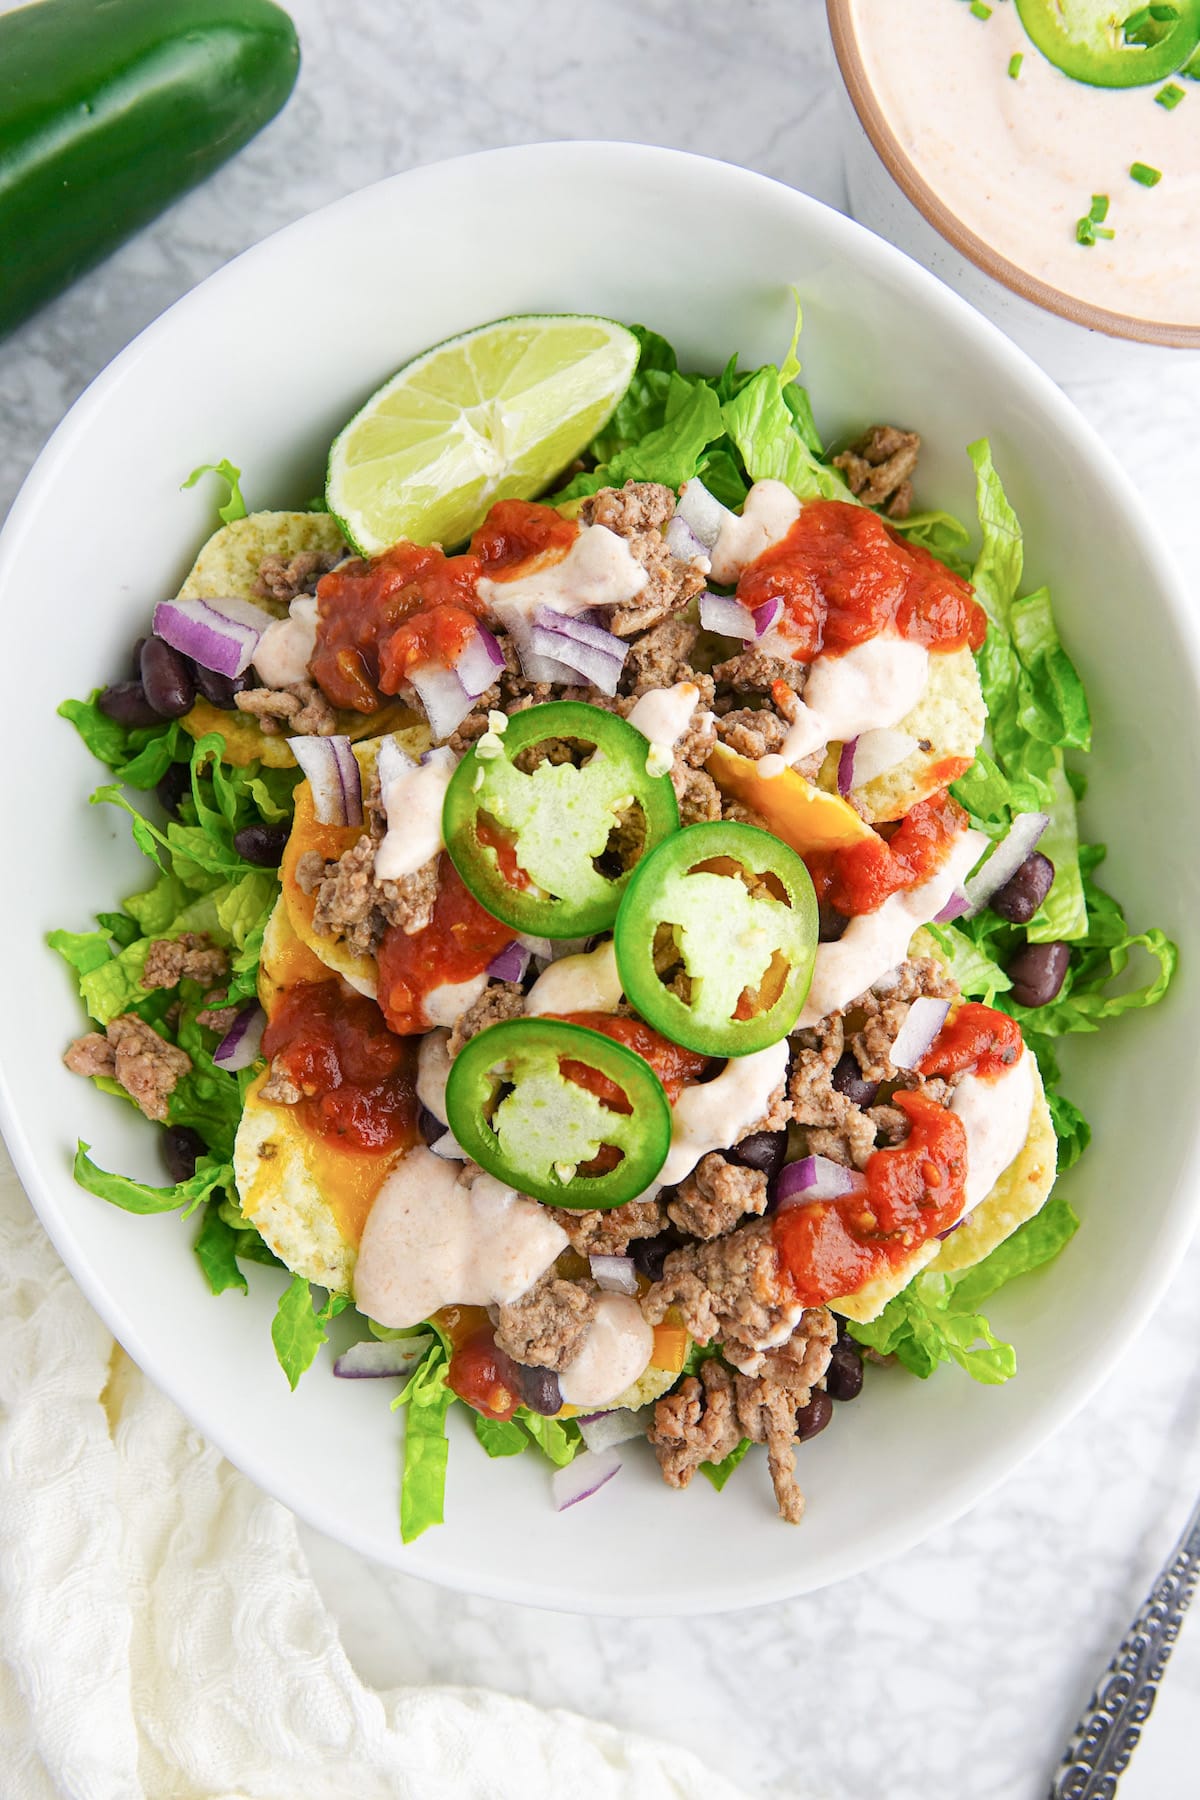 White bowl with salad that includes lettuce, ground beef, black beans, tortilla chips, melted cheese, jalapeno slices, lime wedge, and salad dressing.